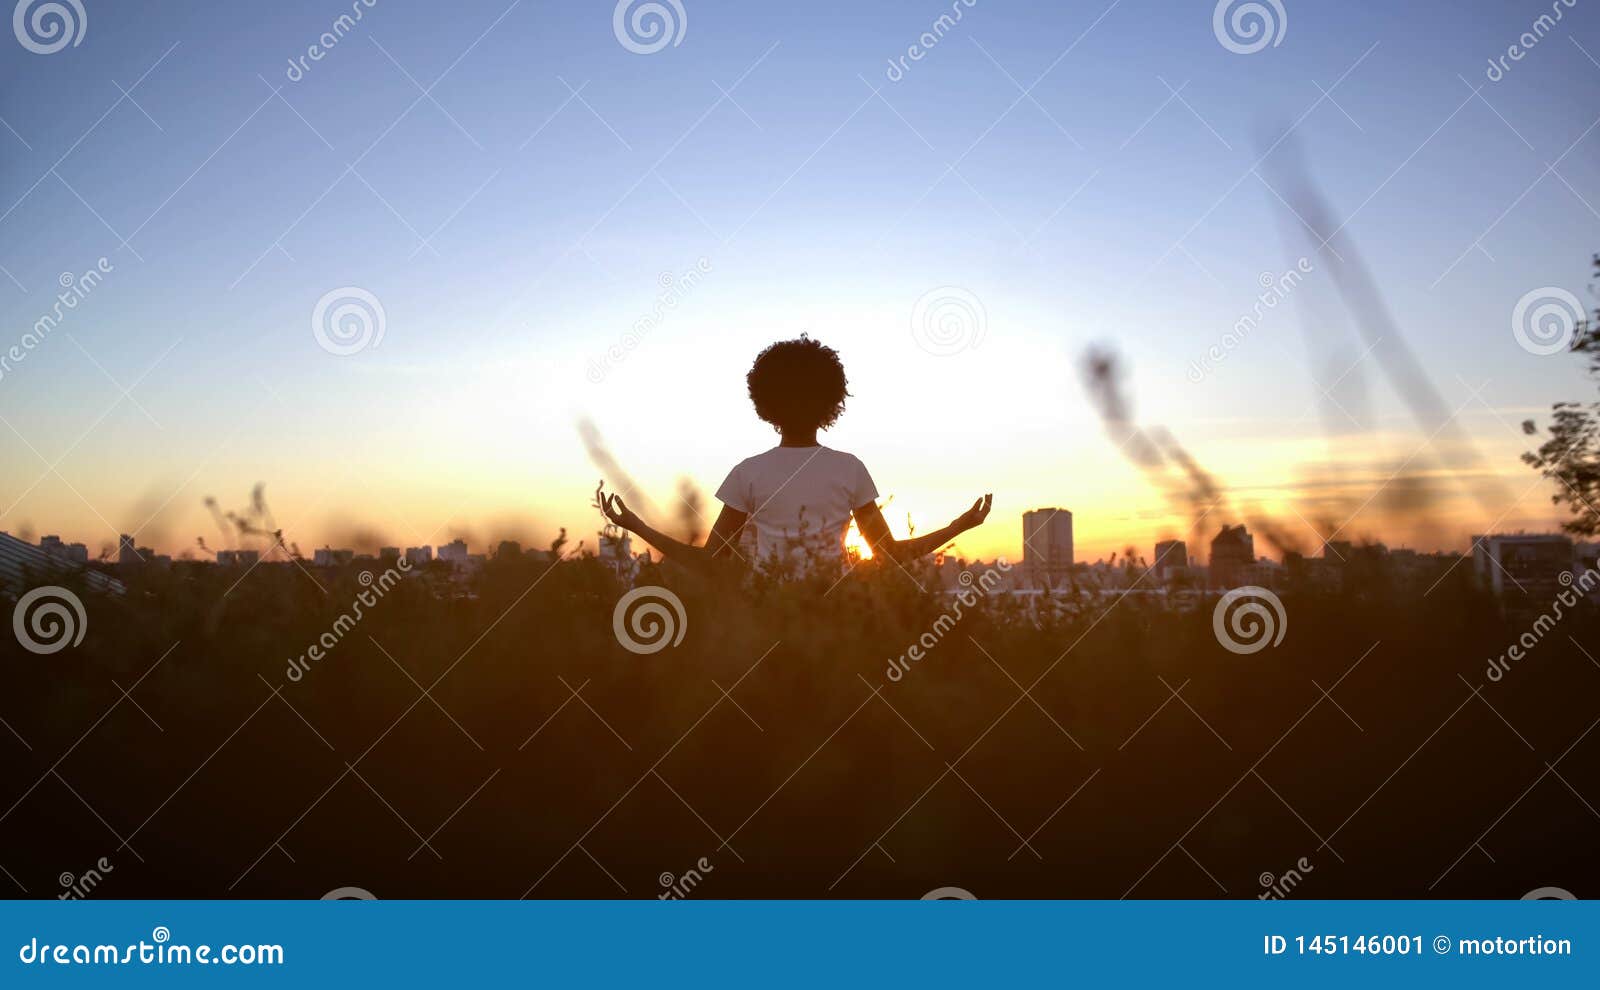 Silhouette of a Woman Posing during Sunset · Free Stock Photo